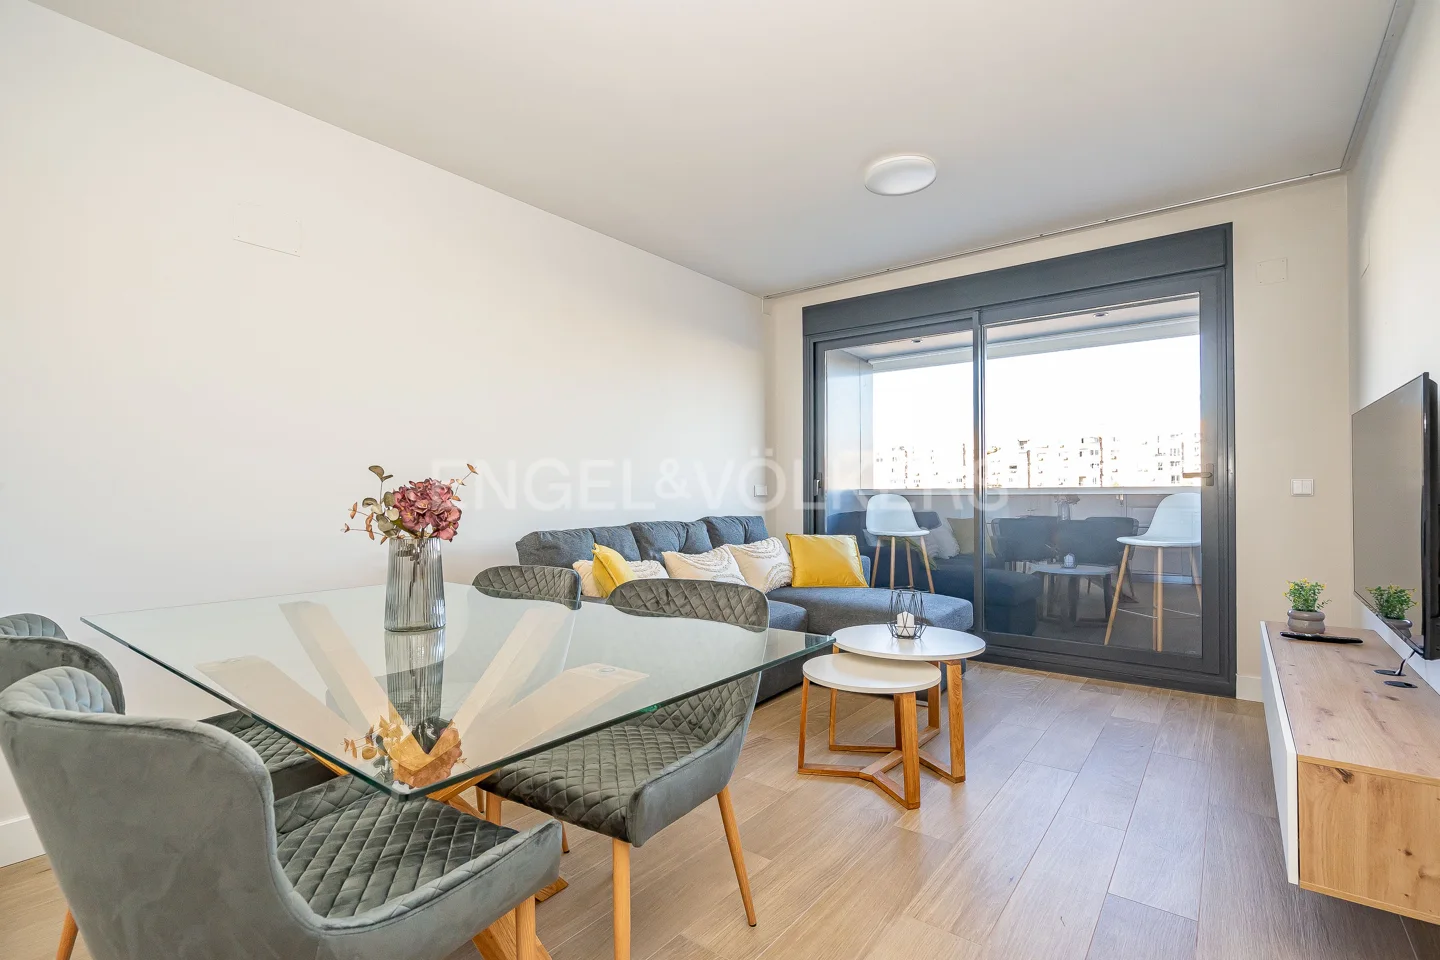 RIVER PARK Brand new in a luxury furnitured flat in  urbanization with pool, garage, outdoor balcony and green areas in Madrid Rio